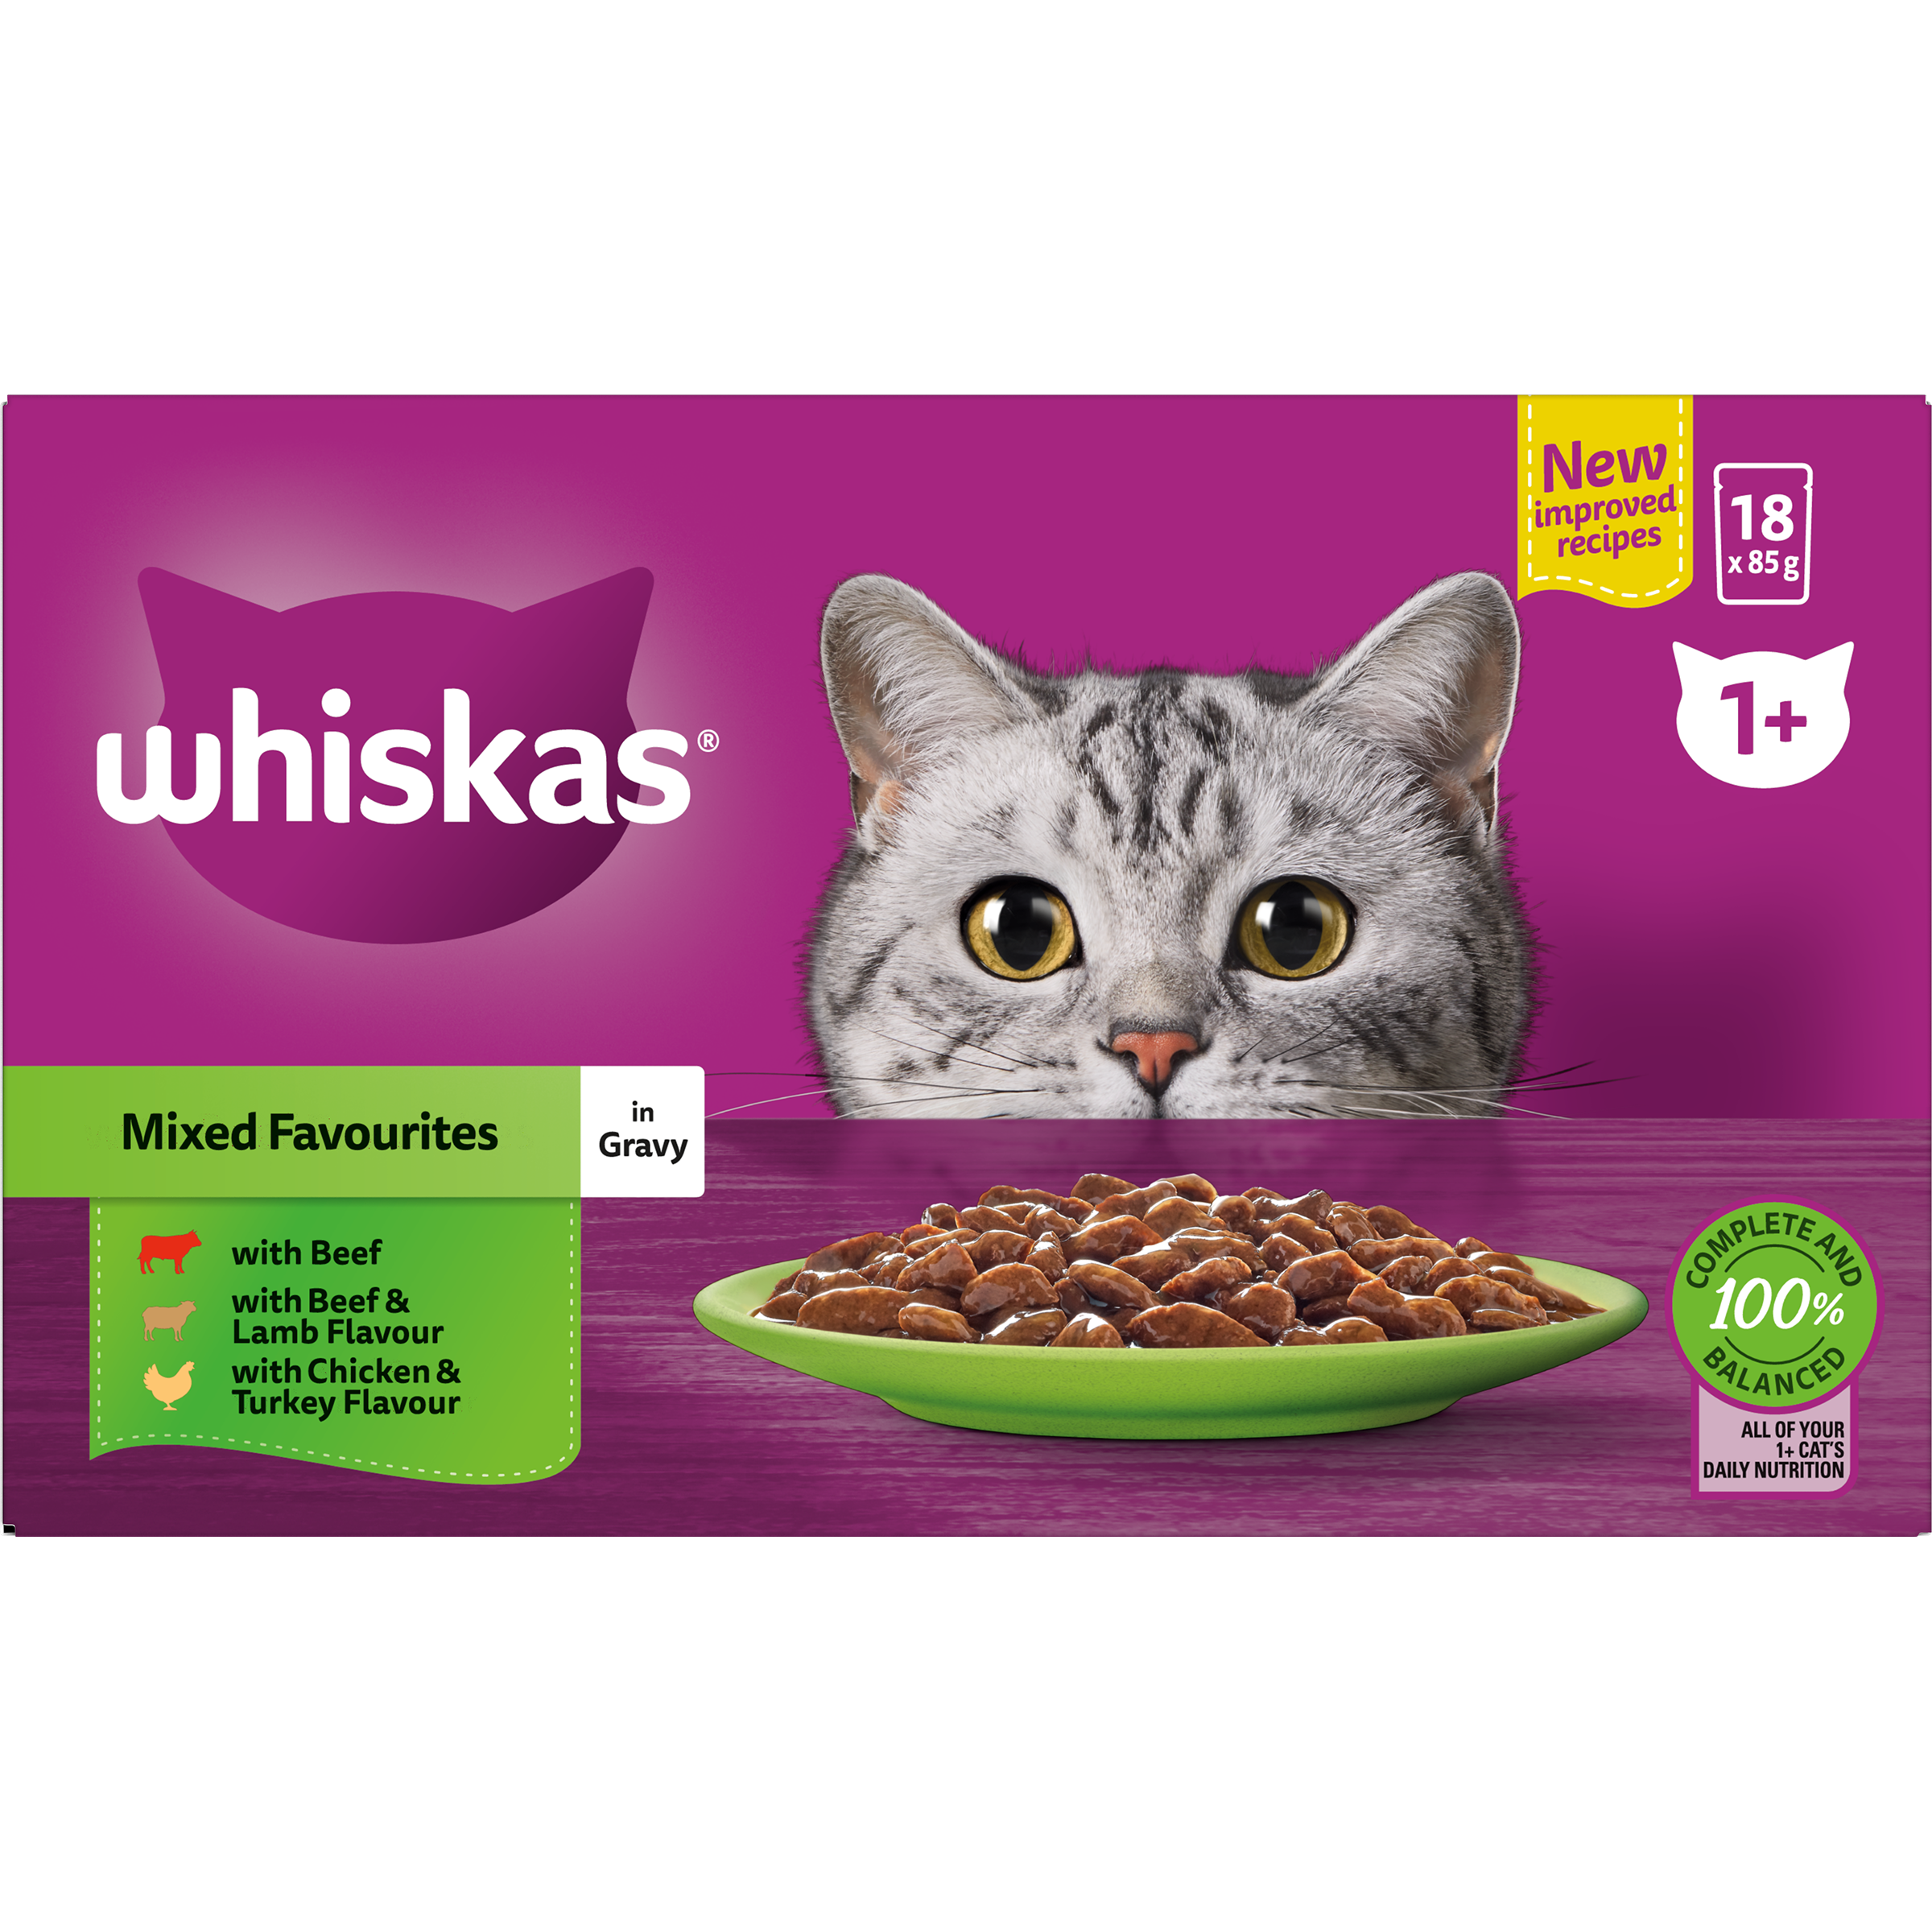 WHISKAS® Wet Cat Food Mixed Favourites In Gravy 18 x 85g Pouches image